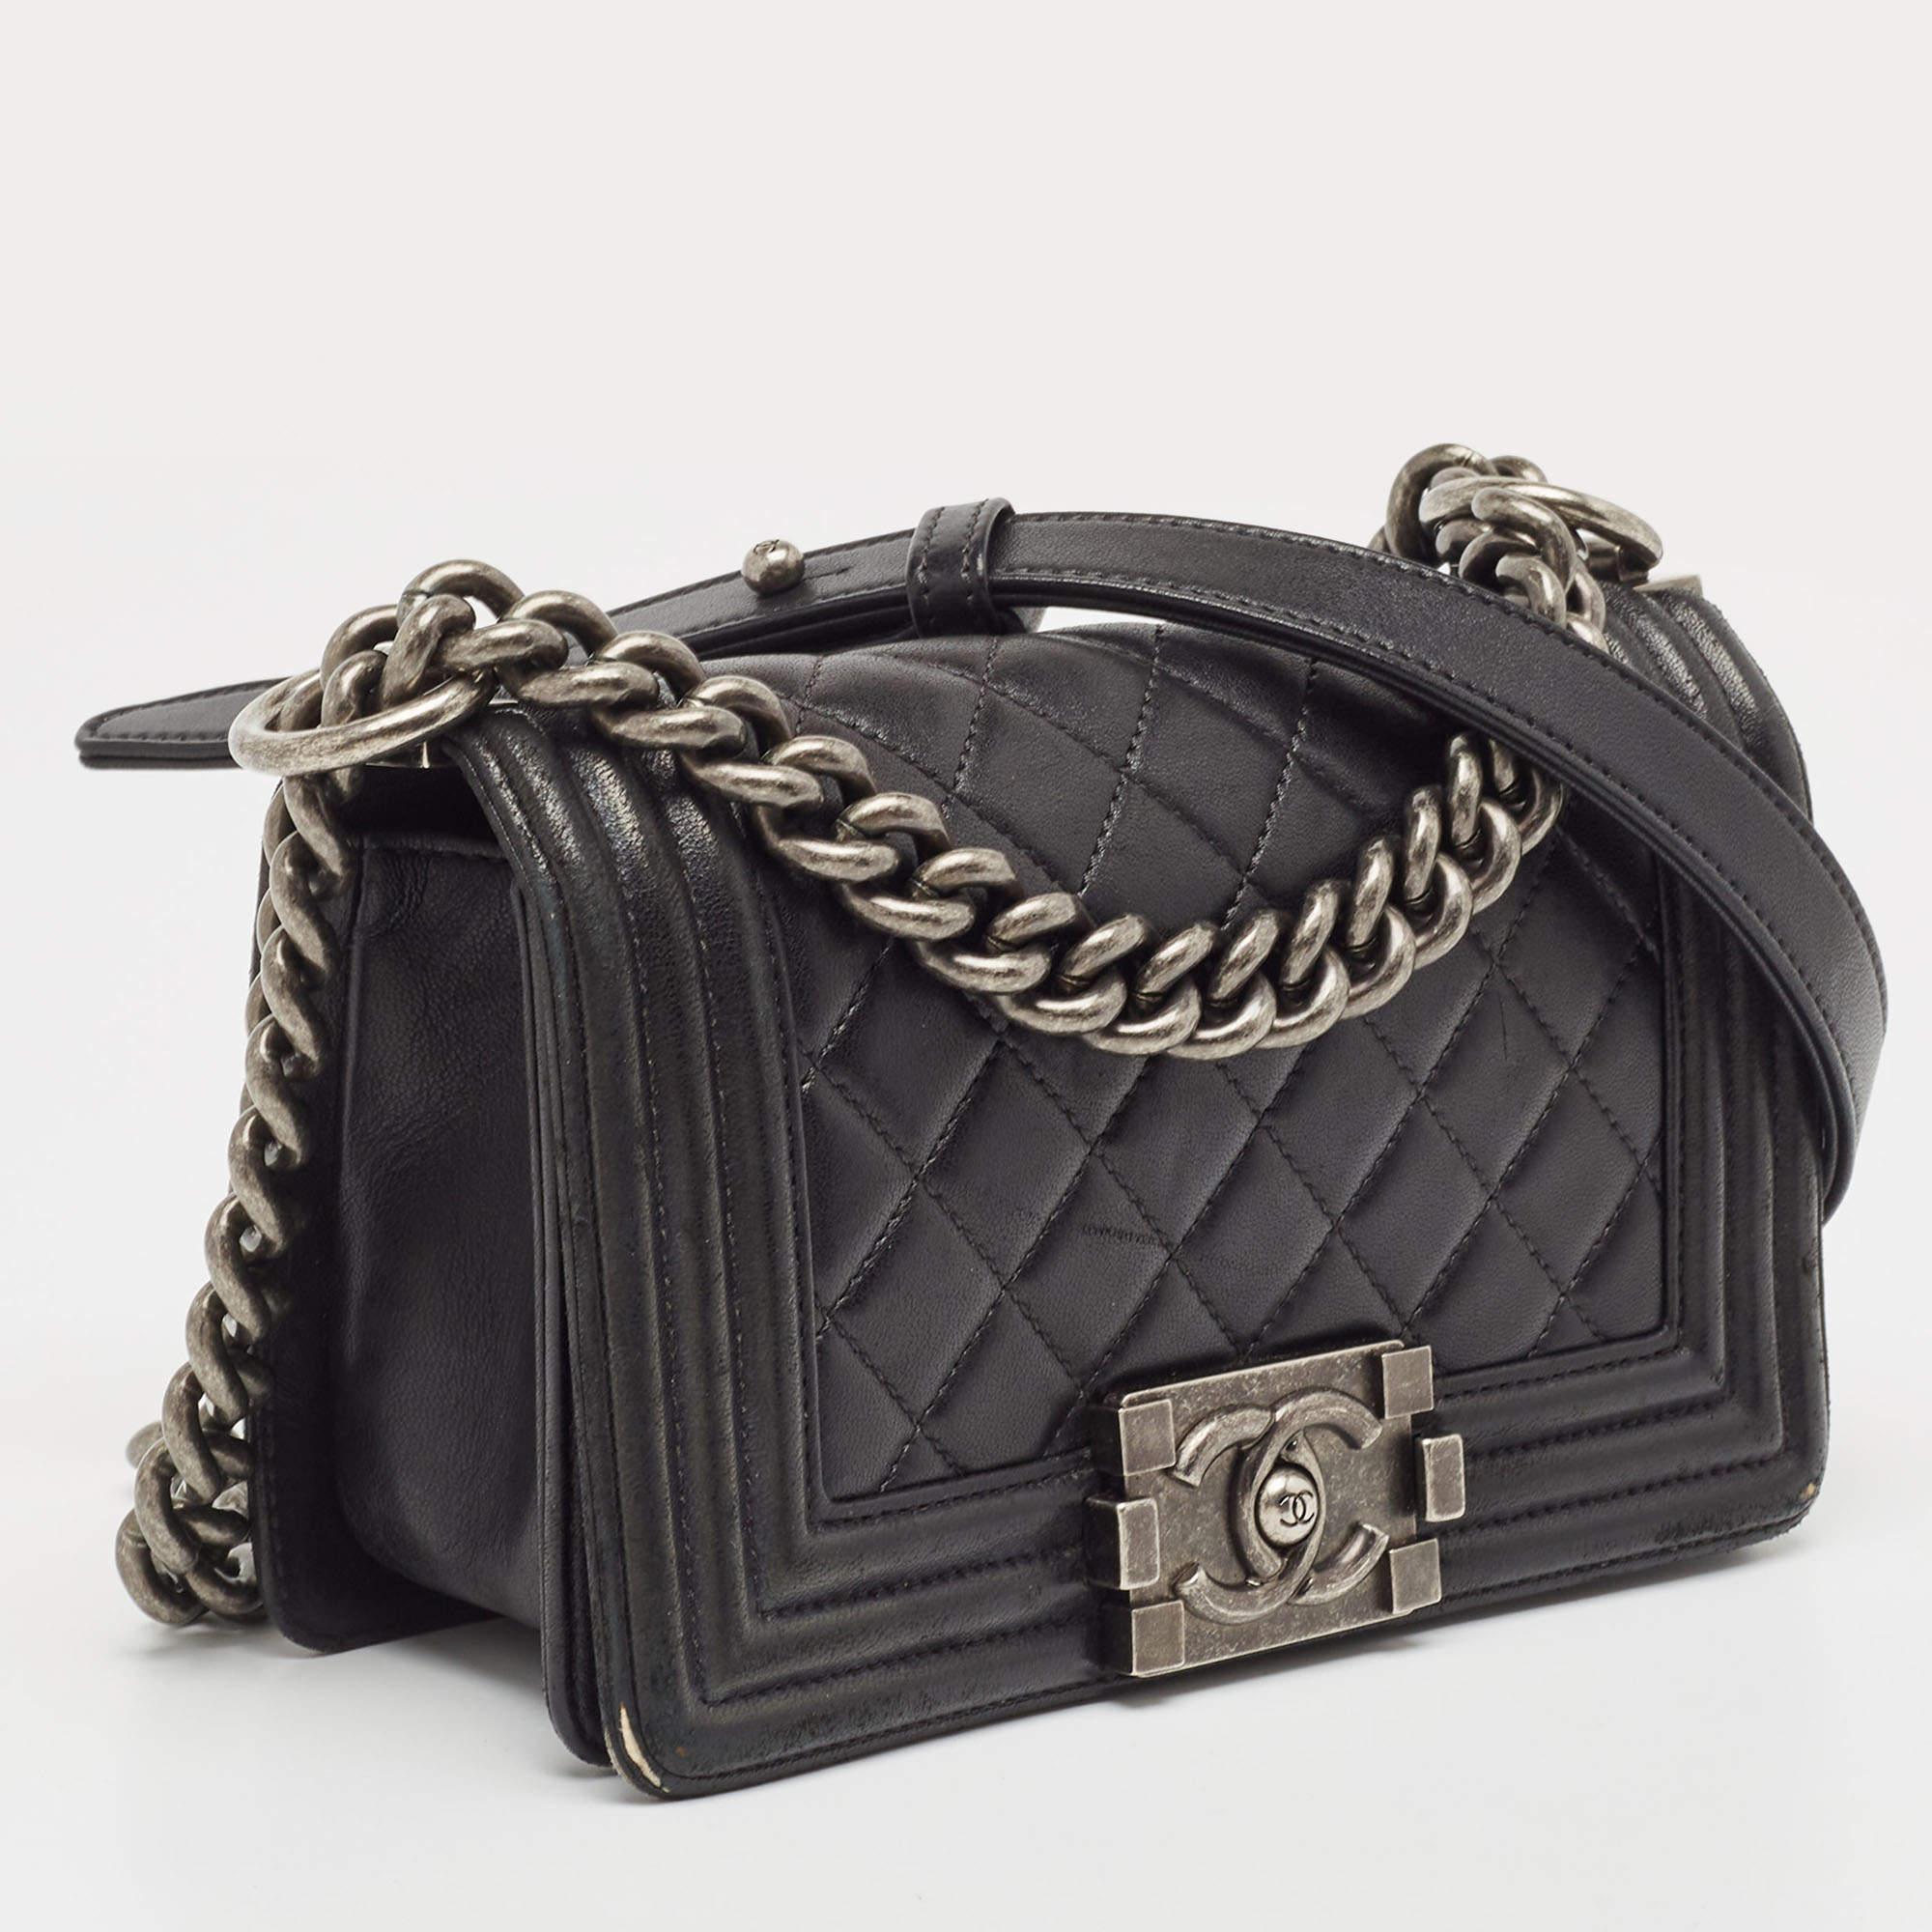 Chanel Black Quilted Leather Small Boy Bag 1